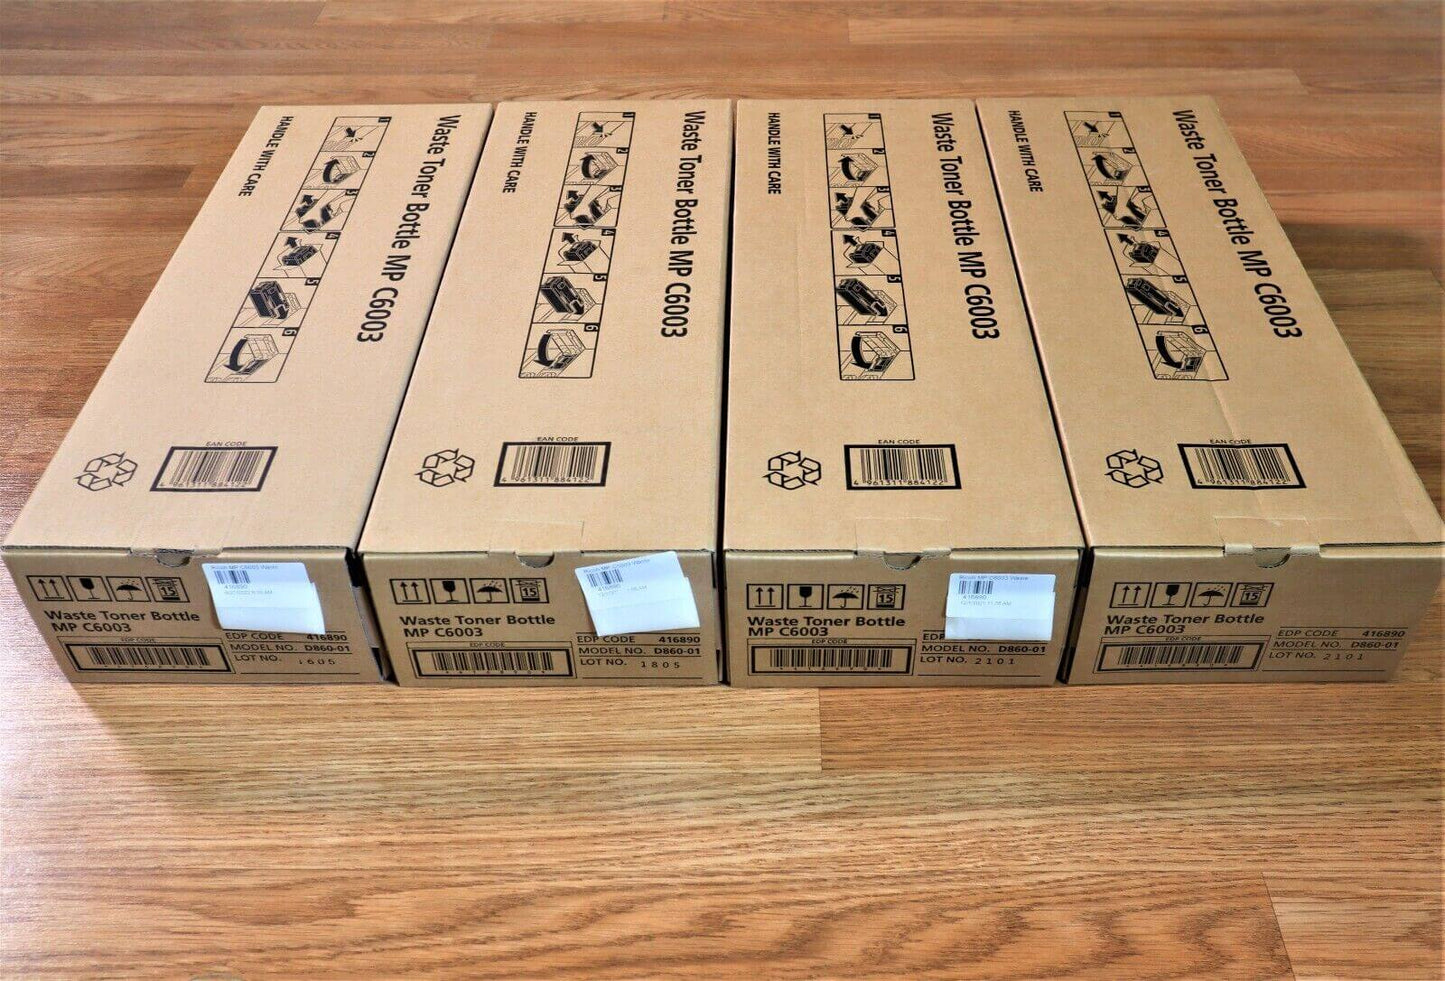 OEM Lot of 4 Ricoh MP C6003 Waste Toner Bottles EDP:416890 Same Day Shipping!! - copier-clearance-center